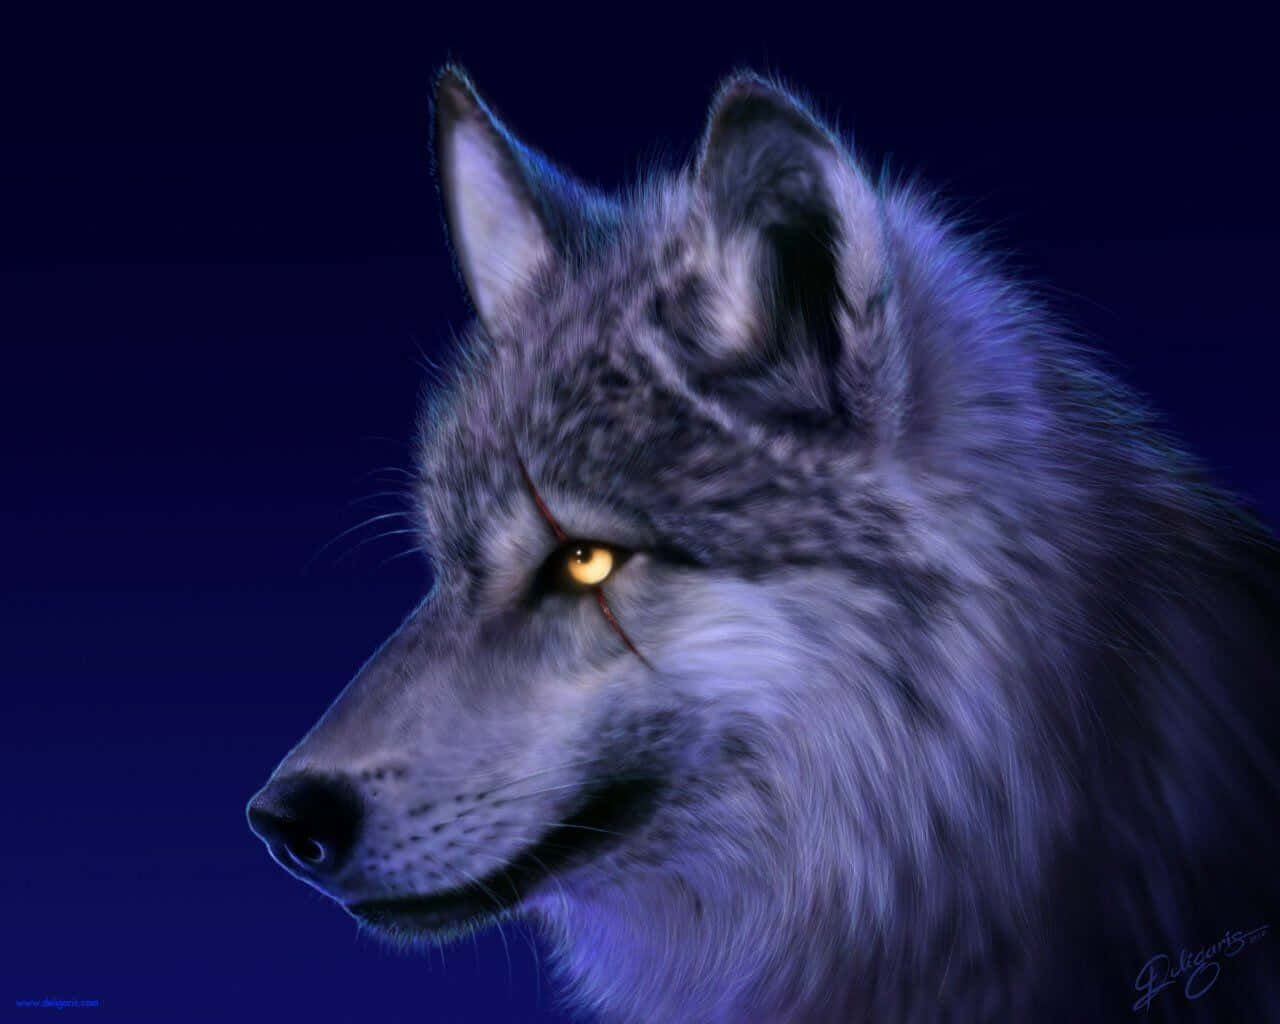 "Howling to the Moon - An Animated Wolf at its Prime" Wallpaper